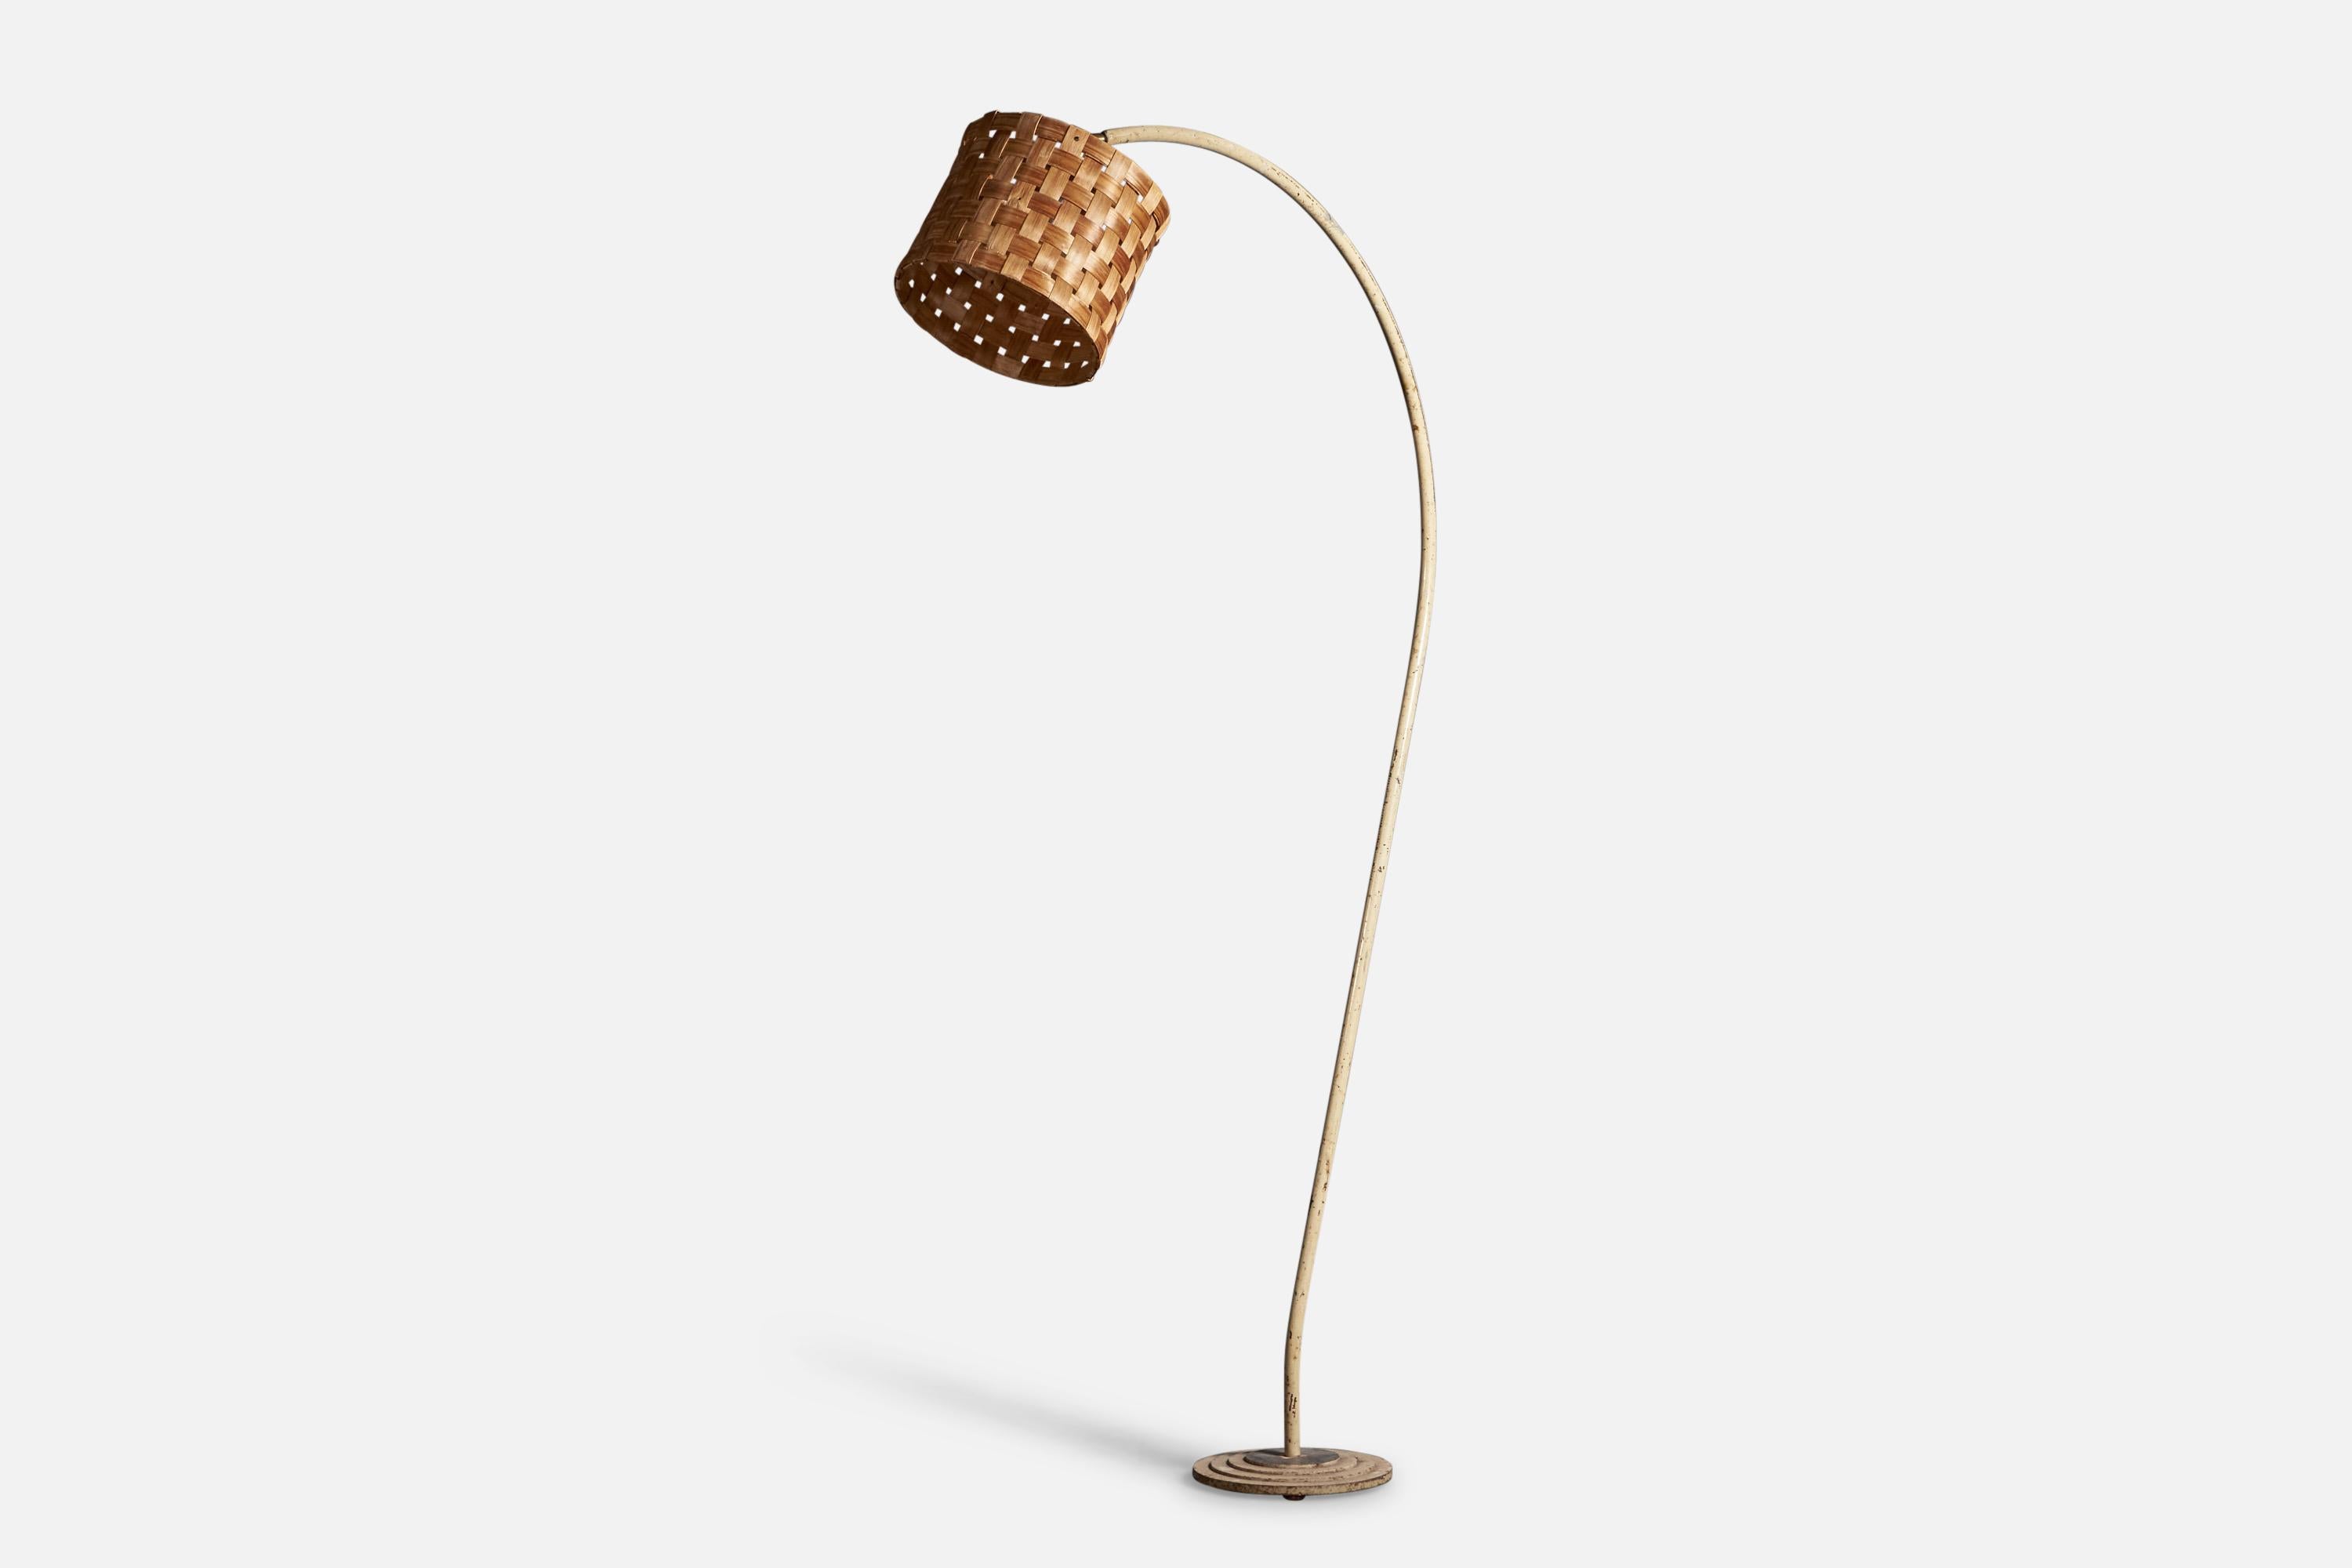 A white-painted metal and braided pine veneer floor lamp, designed and produced in Denmark, c. 1930s

Overall Dimensions: 66.75